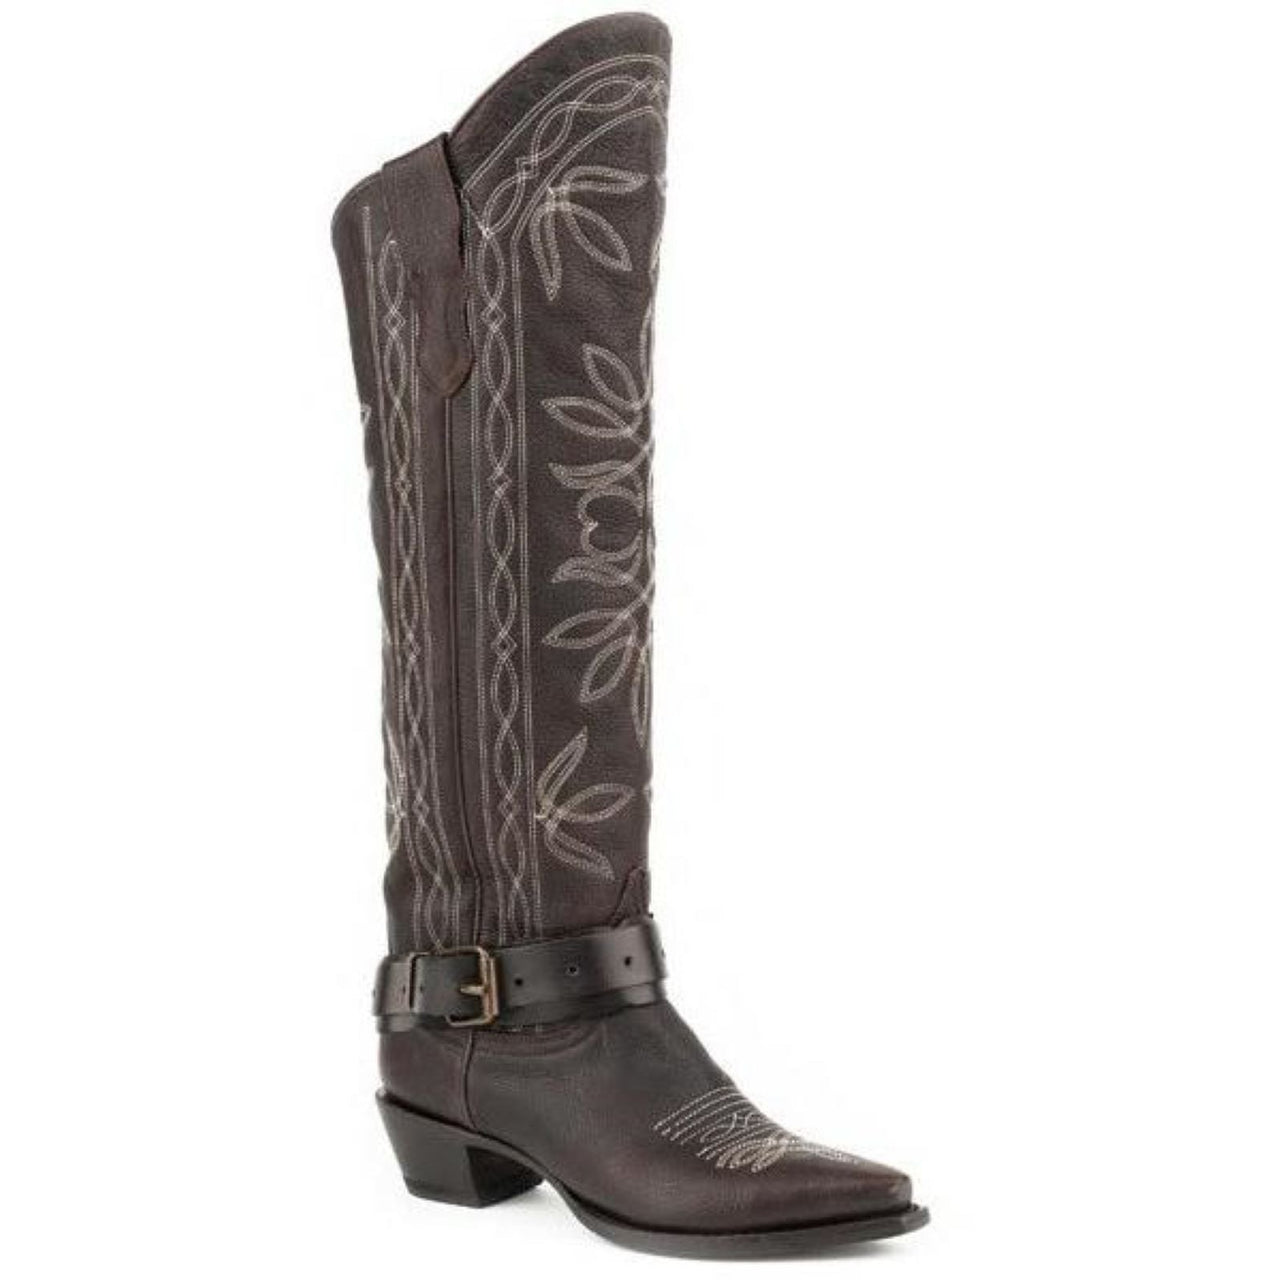 Women's Stetson Serena Boots Snip Toe Handcrafted Brown - yeehawcowboy